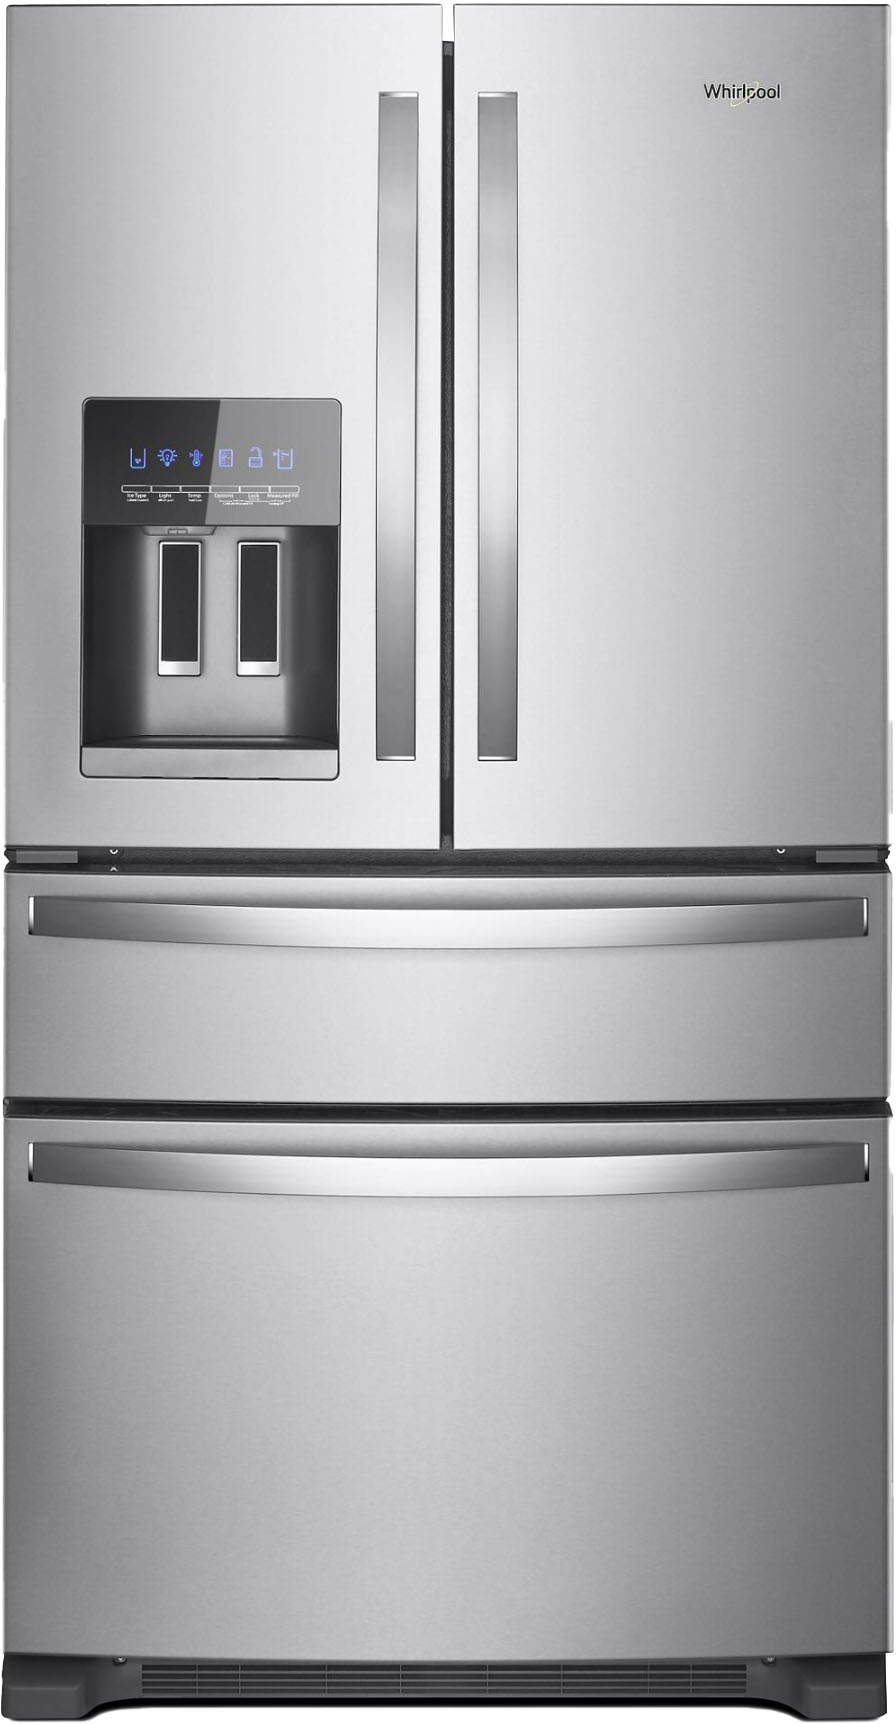 Whirlpool 24 5 Cu Ft 4 Door French, Whirlpool Refrigerator Shelves And Drawers